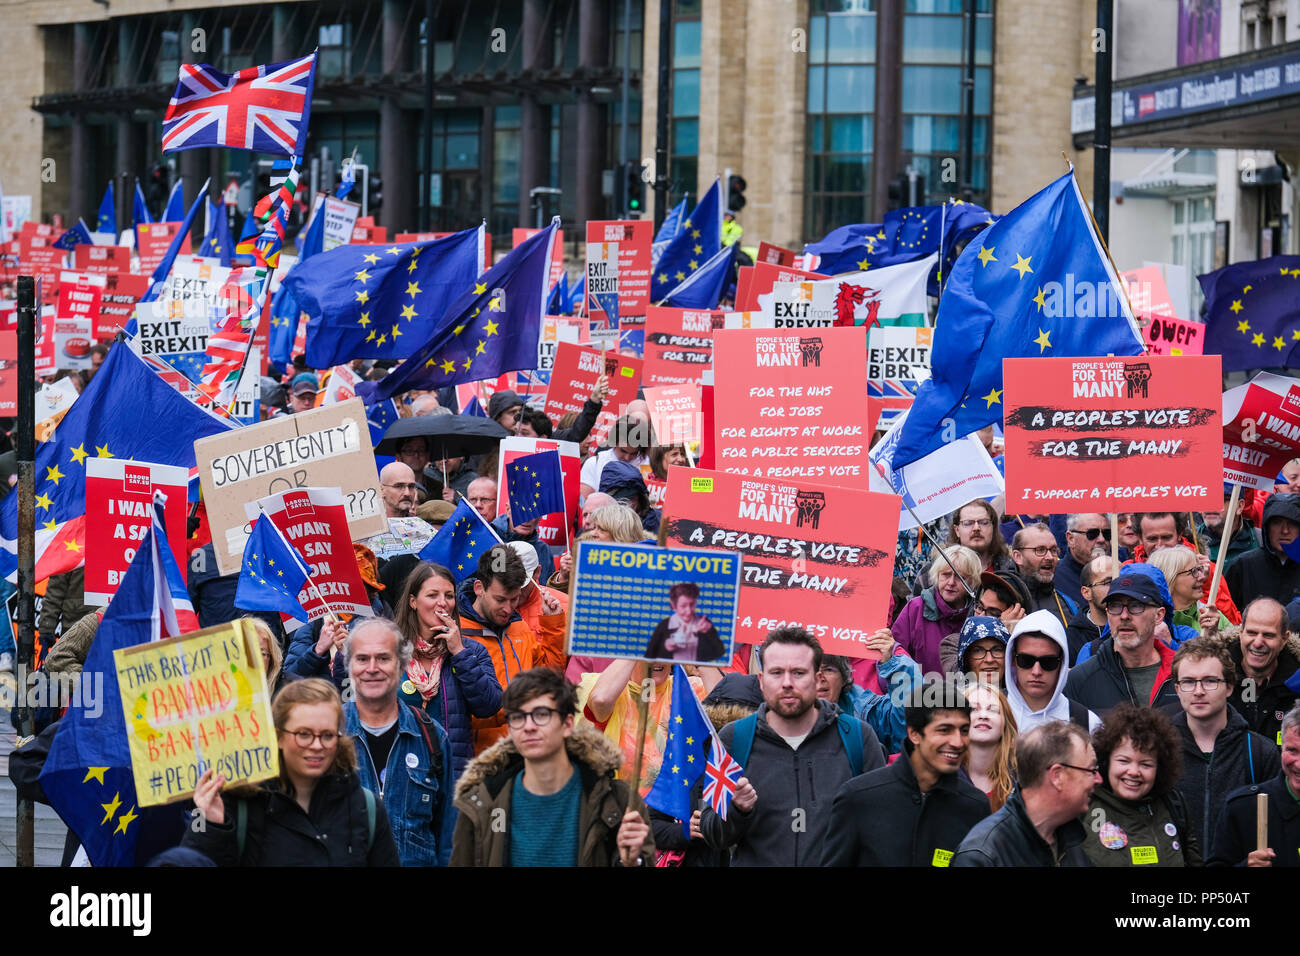 Liverpool, UK. 23rd Sept 2018. Thousands of demonstrators have marched through Liverpool city centre on Sunday, September 23, 2018, calling for a "People's Vote" on the final Brexit deal. The demonstration coincides with the start of the Labour Party Conference which is being held in the city. © Christopher Middleton/Alamy Live News Stock Photo